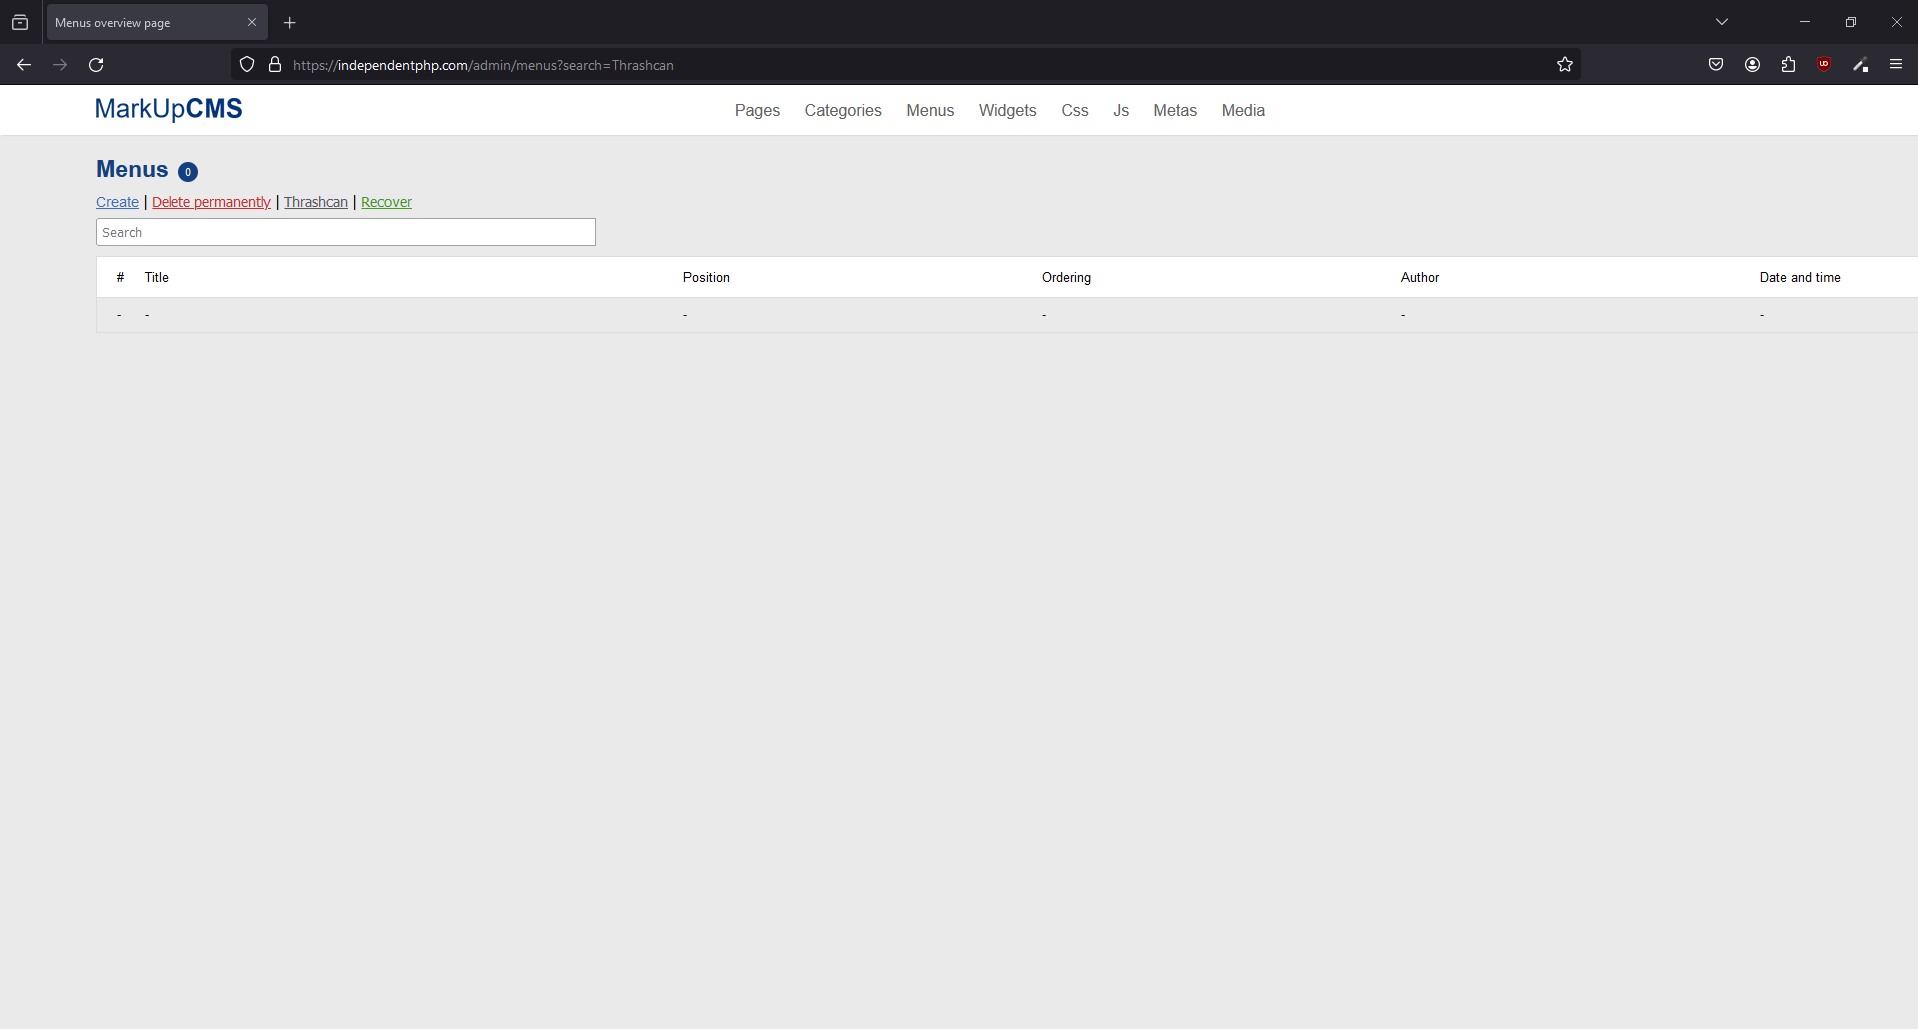 A screenshot of the menus index page where the search is being used and the value is set to thrashcan in MarkUpCMS